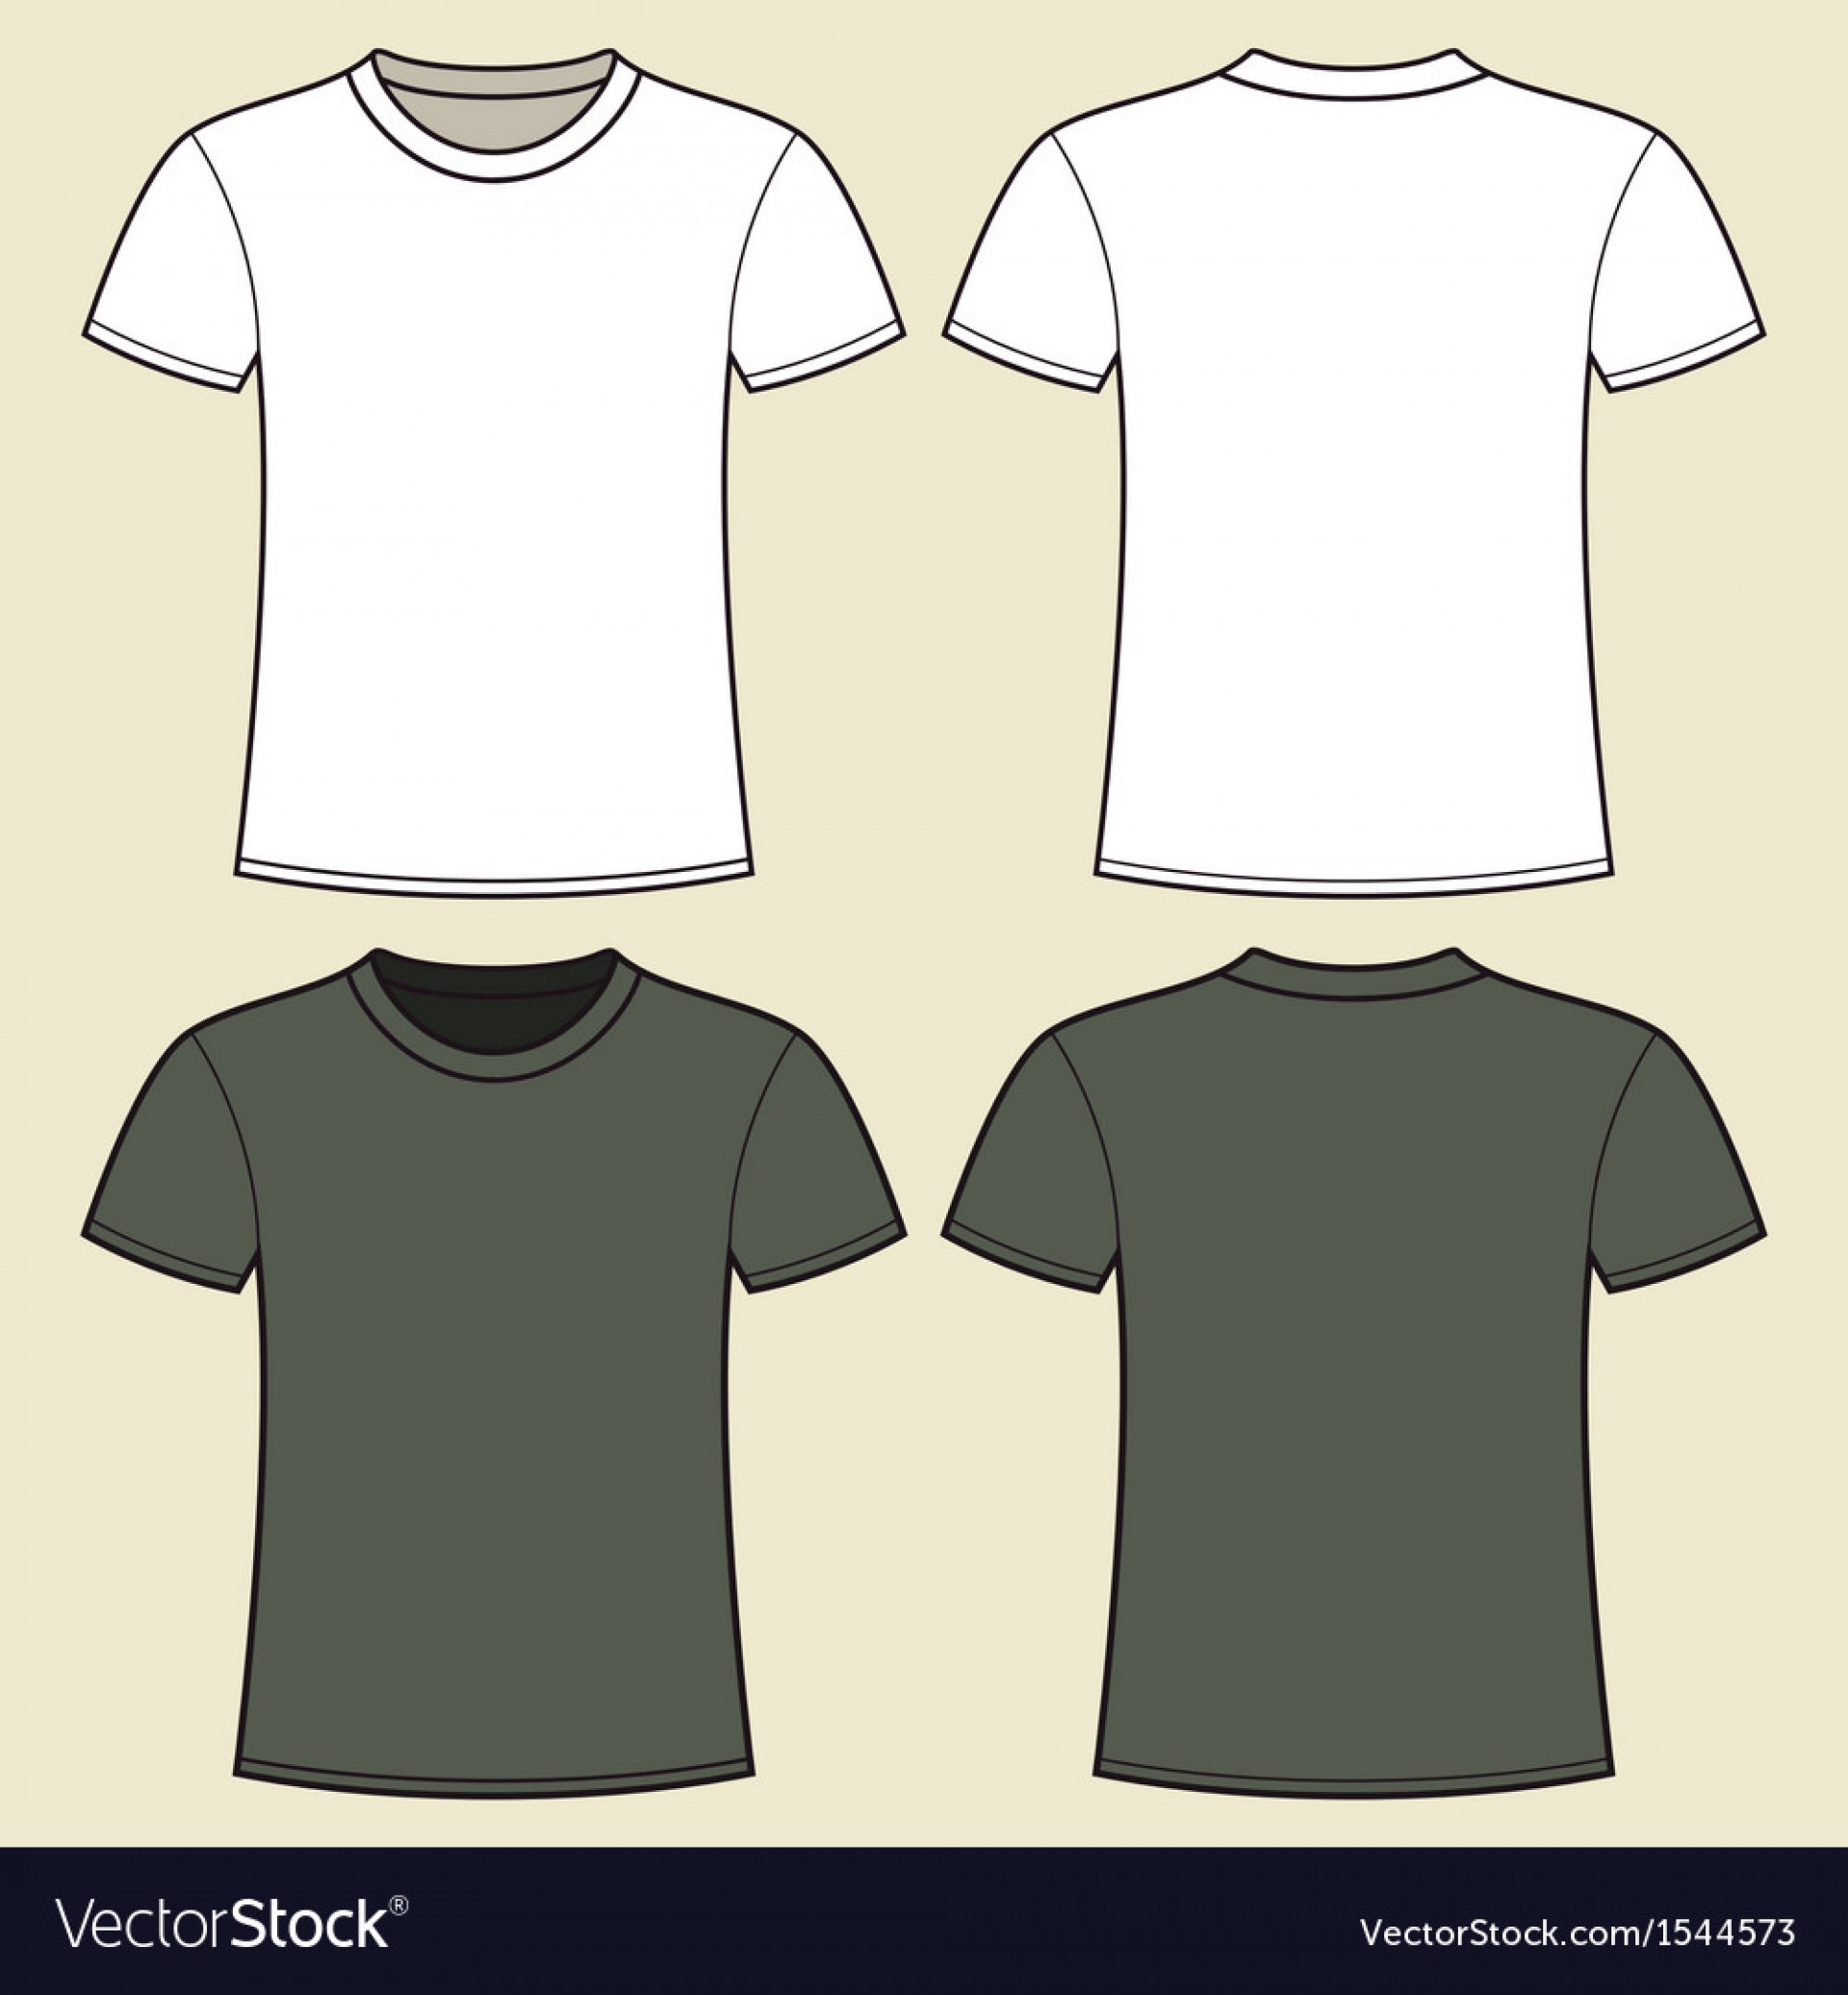 T Shirt Vector Template Illustrator at Collection of